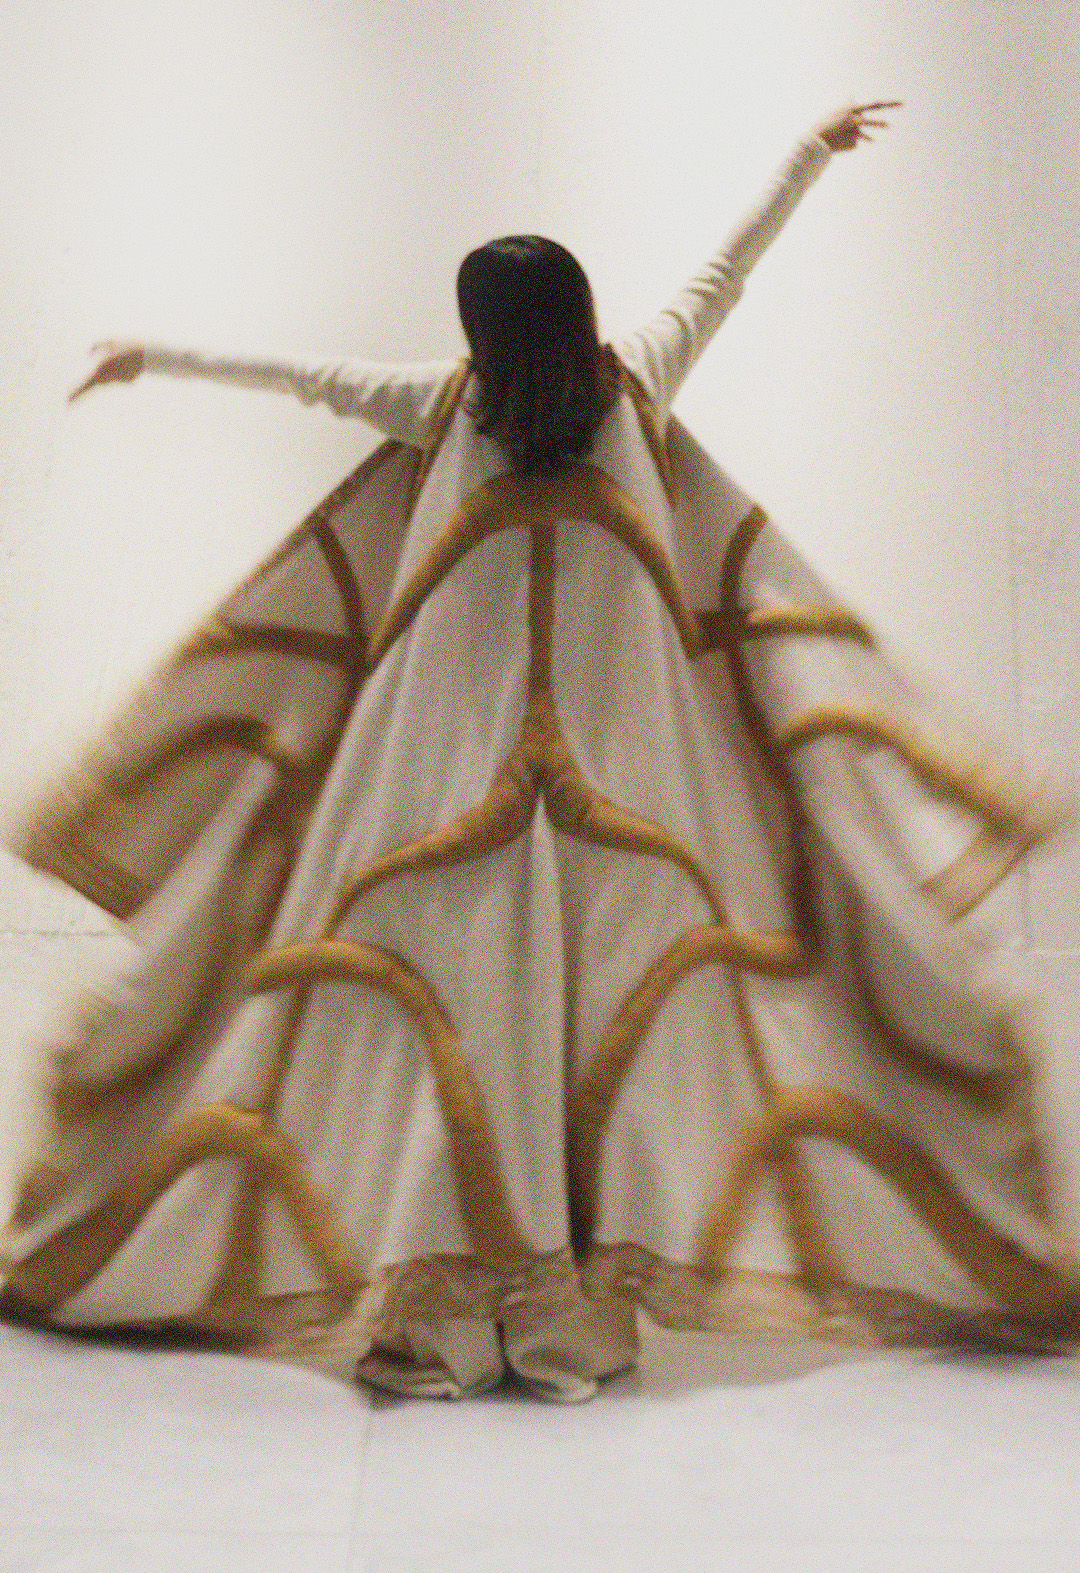 The model is wearing a huge two-color, jacquard pattern reversible cardigan, which has borders all around. The tan pattern lines inspired by sari are stuffed. She is wearing white wide-legged pants, which are a little bit visible below the hemline of the cape. Her hands are up in the air, and the background is white. 